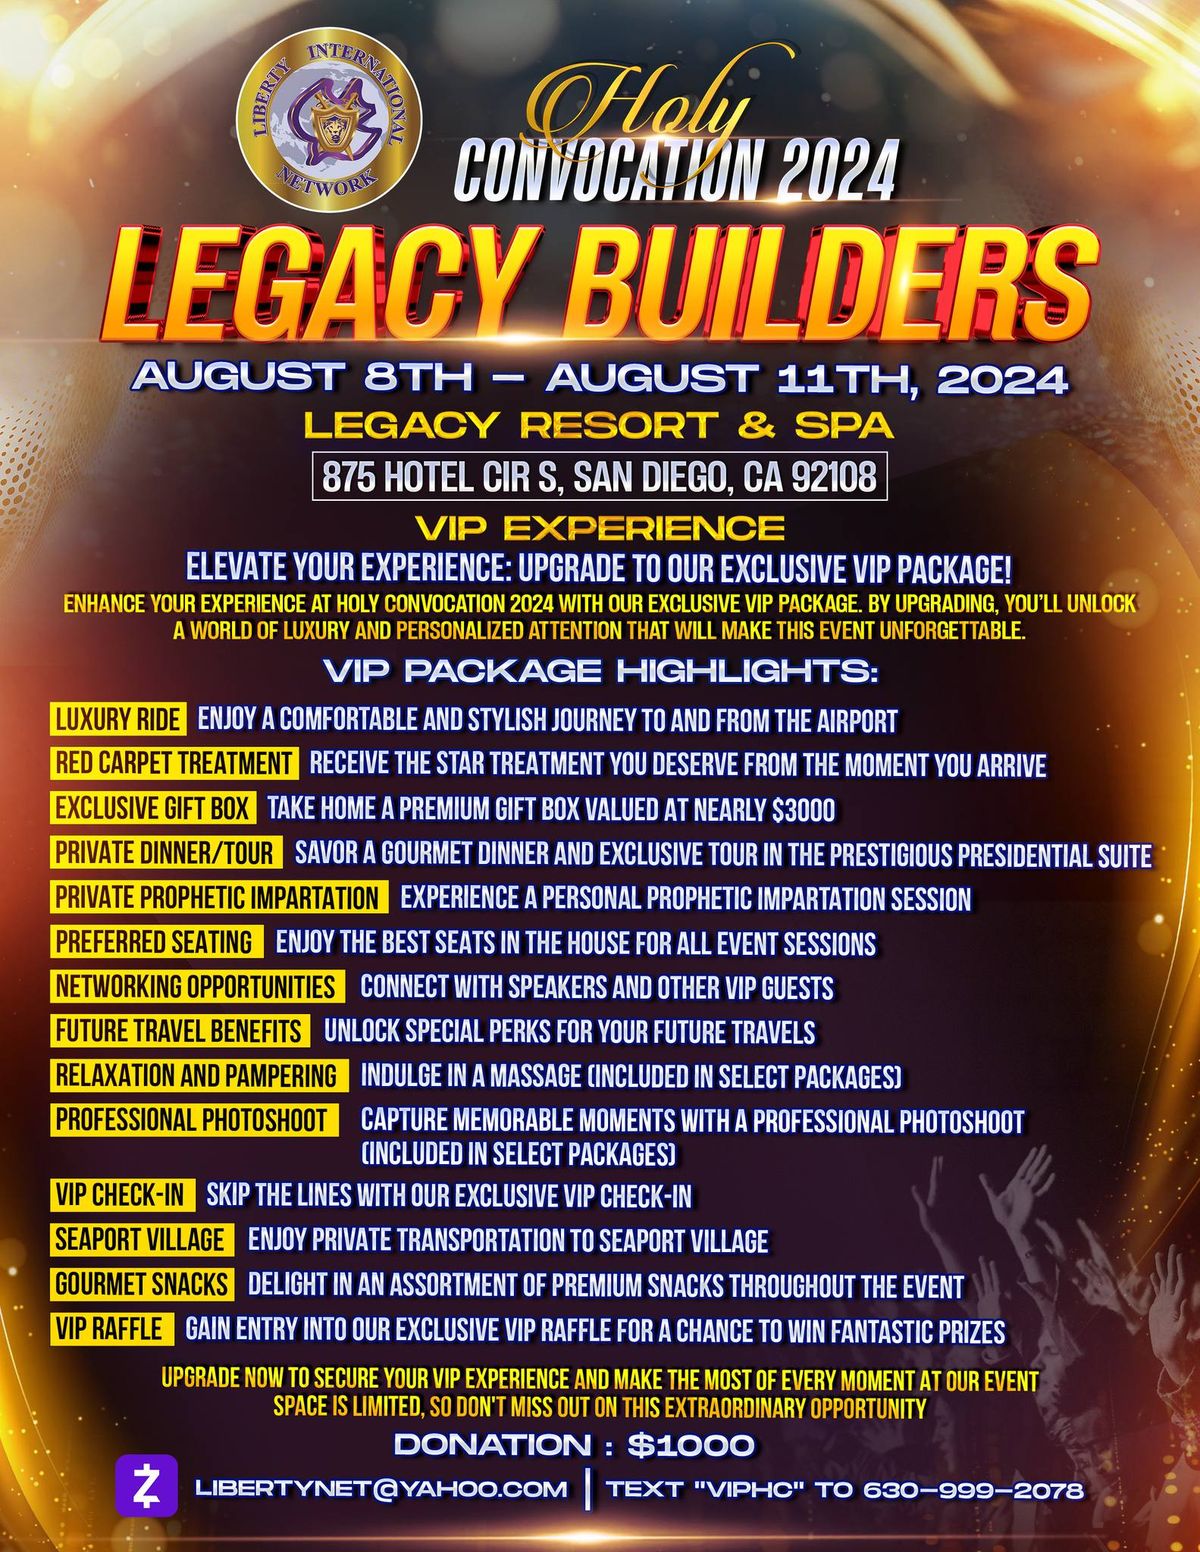 Holy Convocation 2024 Legacy Builders